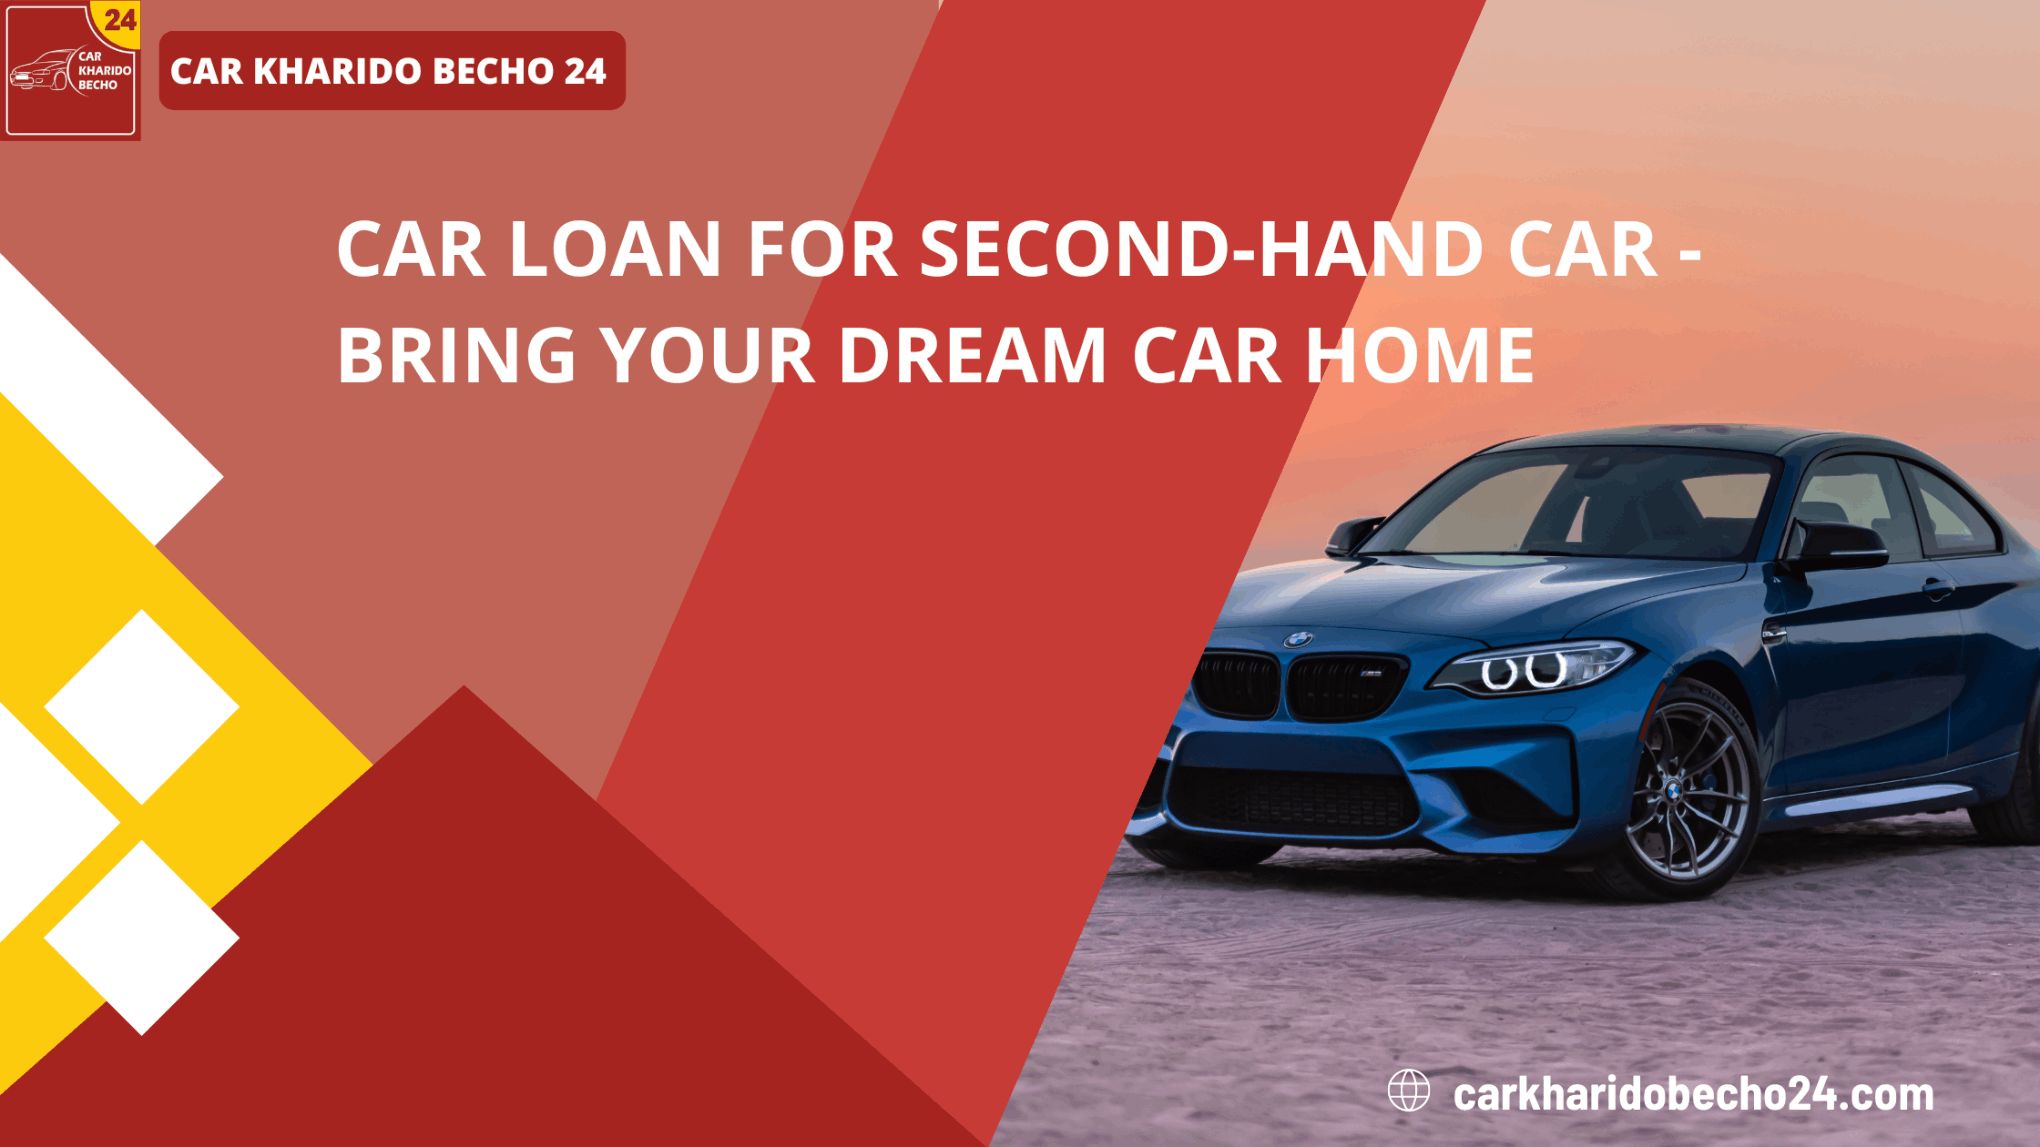 Best Car loan for second-hand car in 2022